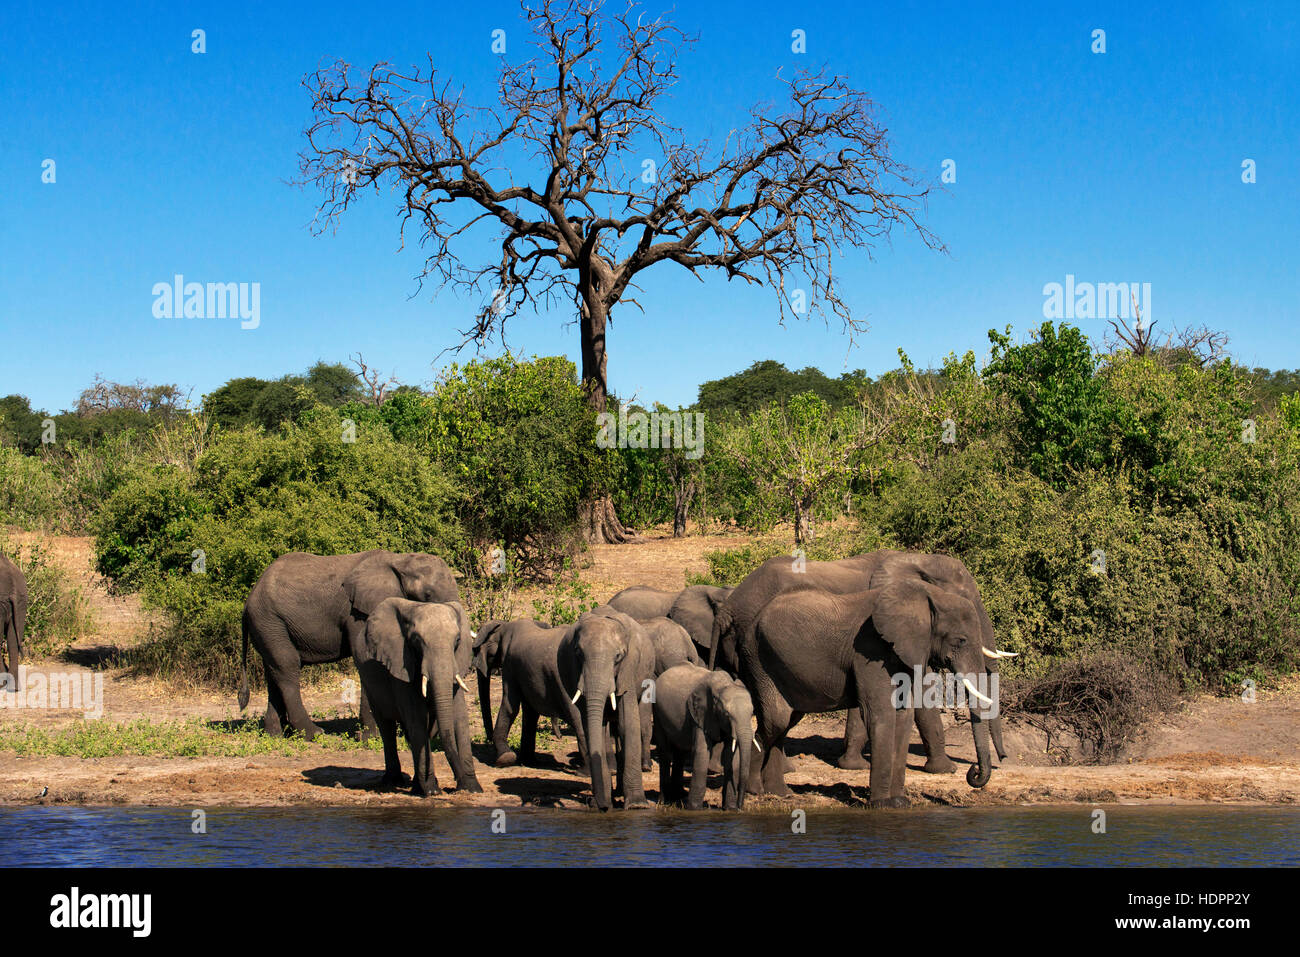 From Victoria Falls is possible to visit the nearby Botswana. Specifically Chobe National Park. Chobe - The Elephant Capital of Africa. Massive elepha Stock Photo